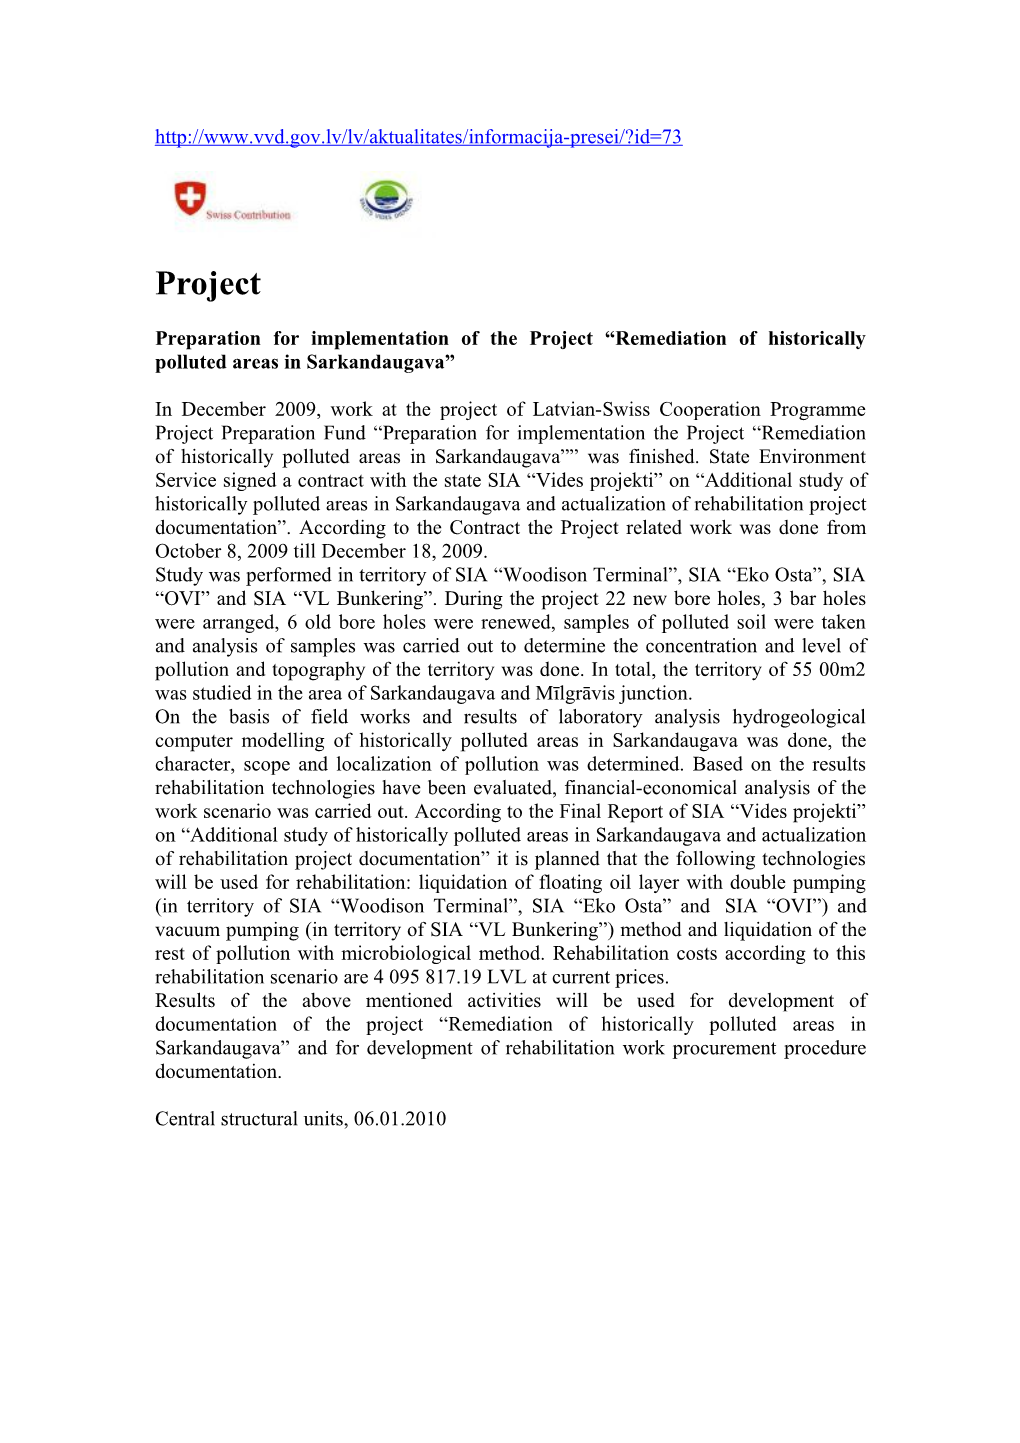 Preparation for Implementation of the Project Remediation of Historically Polluted Areas